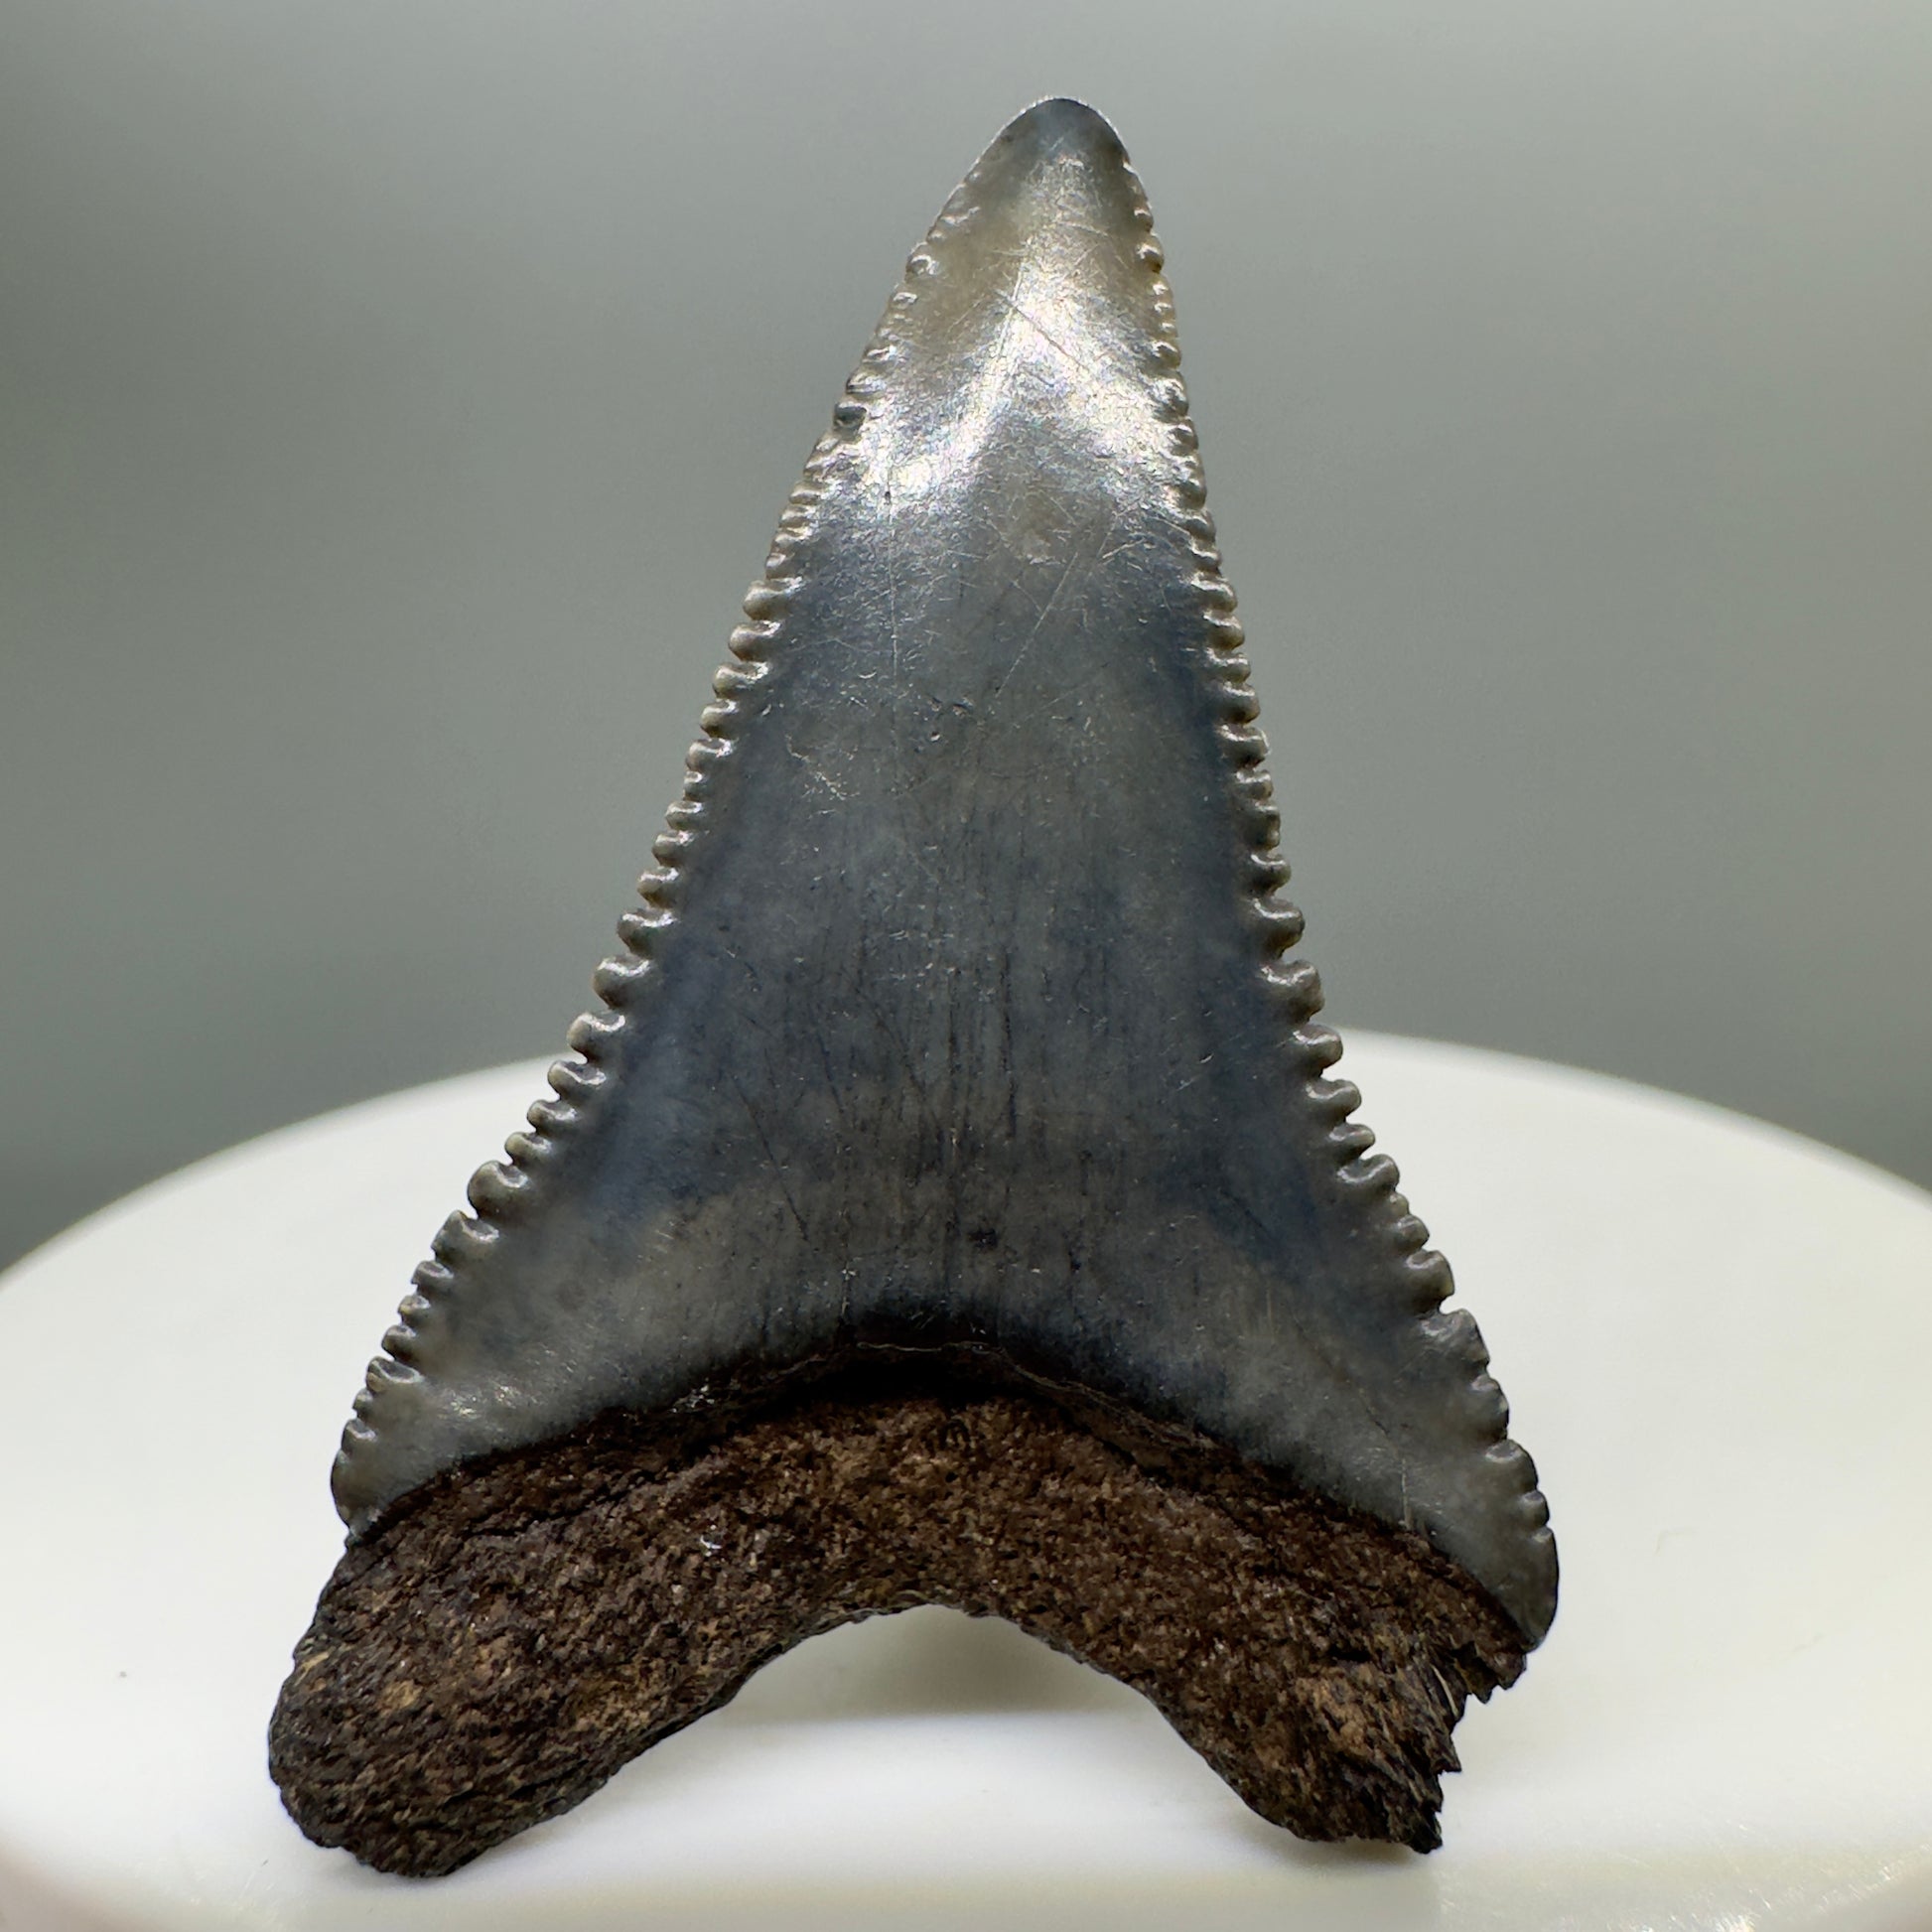 Colorful, lower 1.48" Fossil Great White Shark Tooth - South Carolina River GW1091 - Back